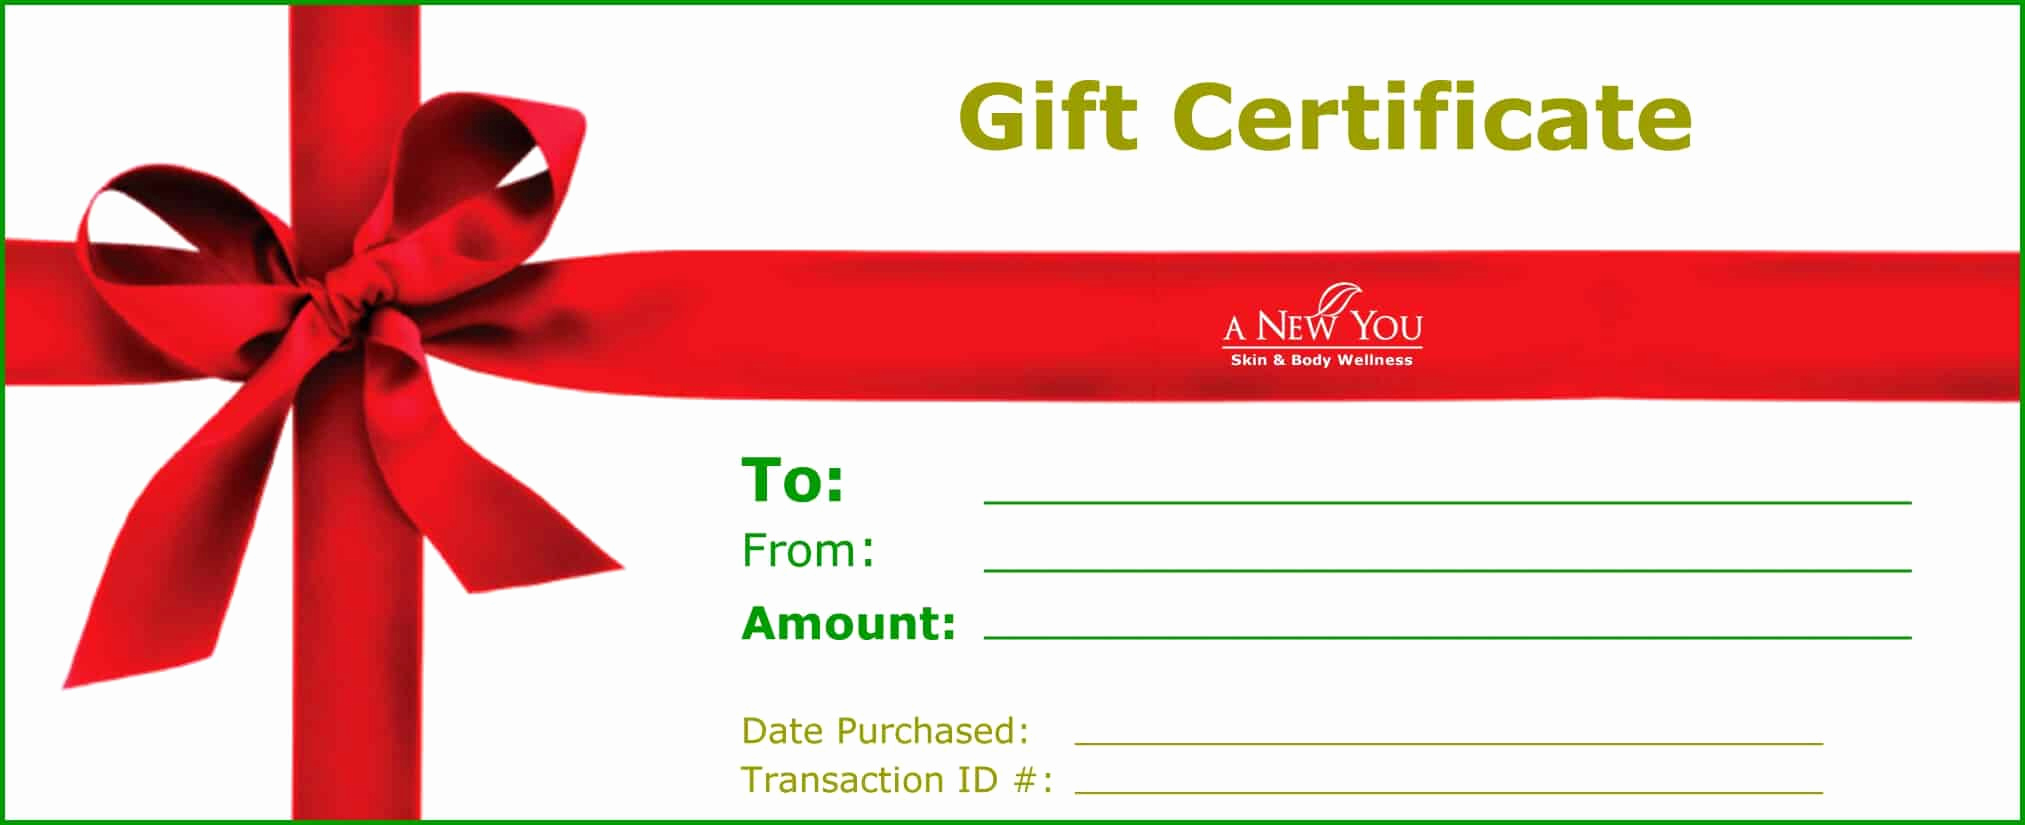 Sample Gift Certificate Template Lovely 18 Gift Certificate Templates Excel Pdf formats